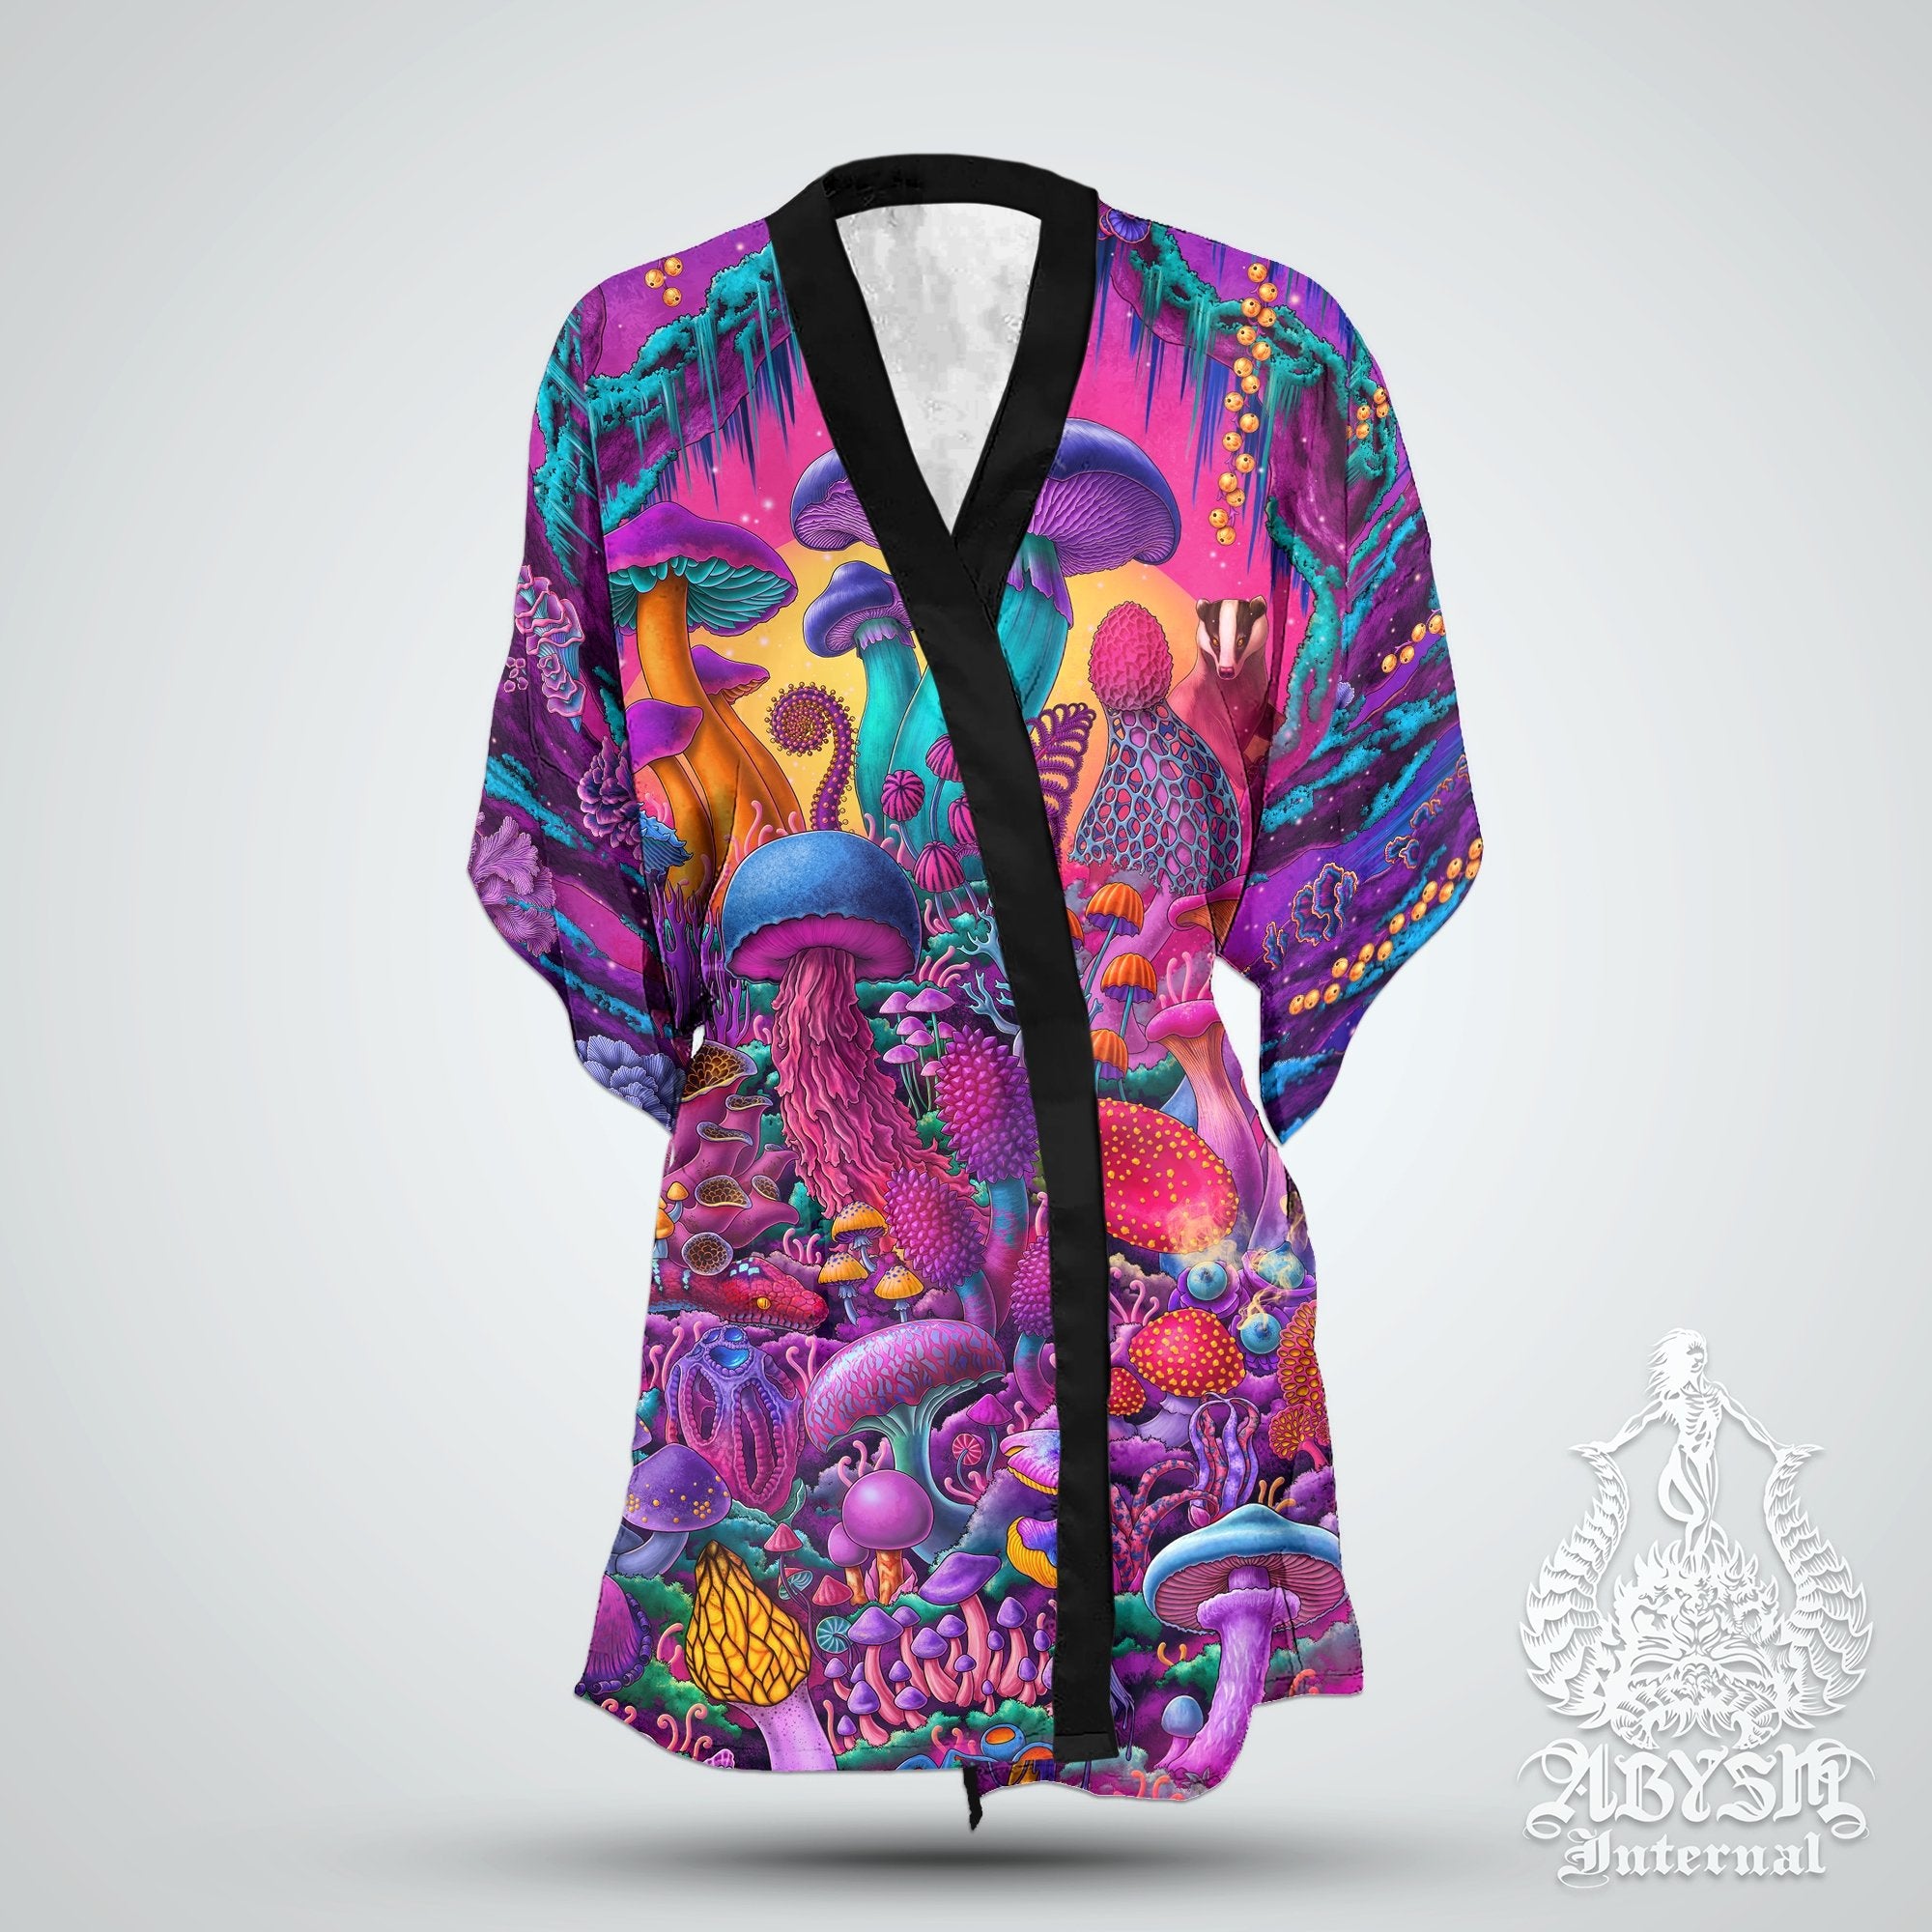 Psychedelic Mushrooms Cover Up, Synthwave Outfit, Retrowave Party Kimono, Vaporwave Summer Festival Robe, 80s Art, Magic Shrooms Gift, Alternative Clothing, Unisex - Abysm Internal